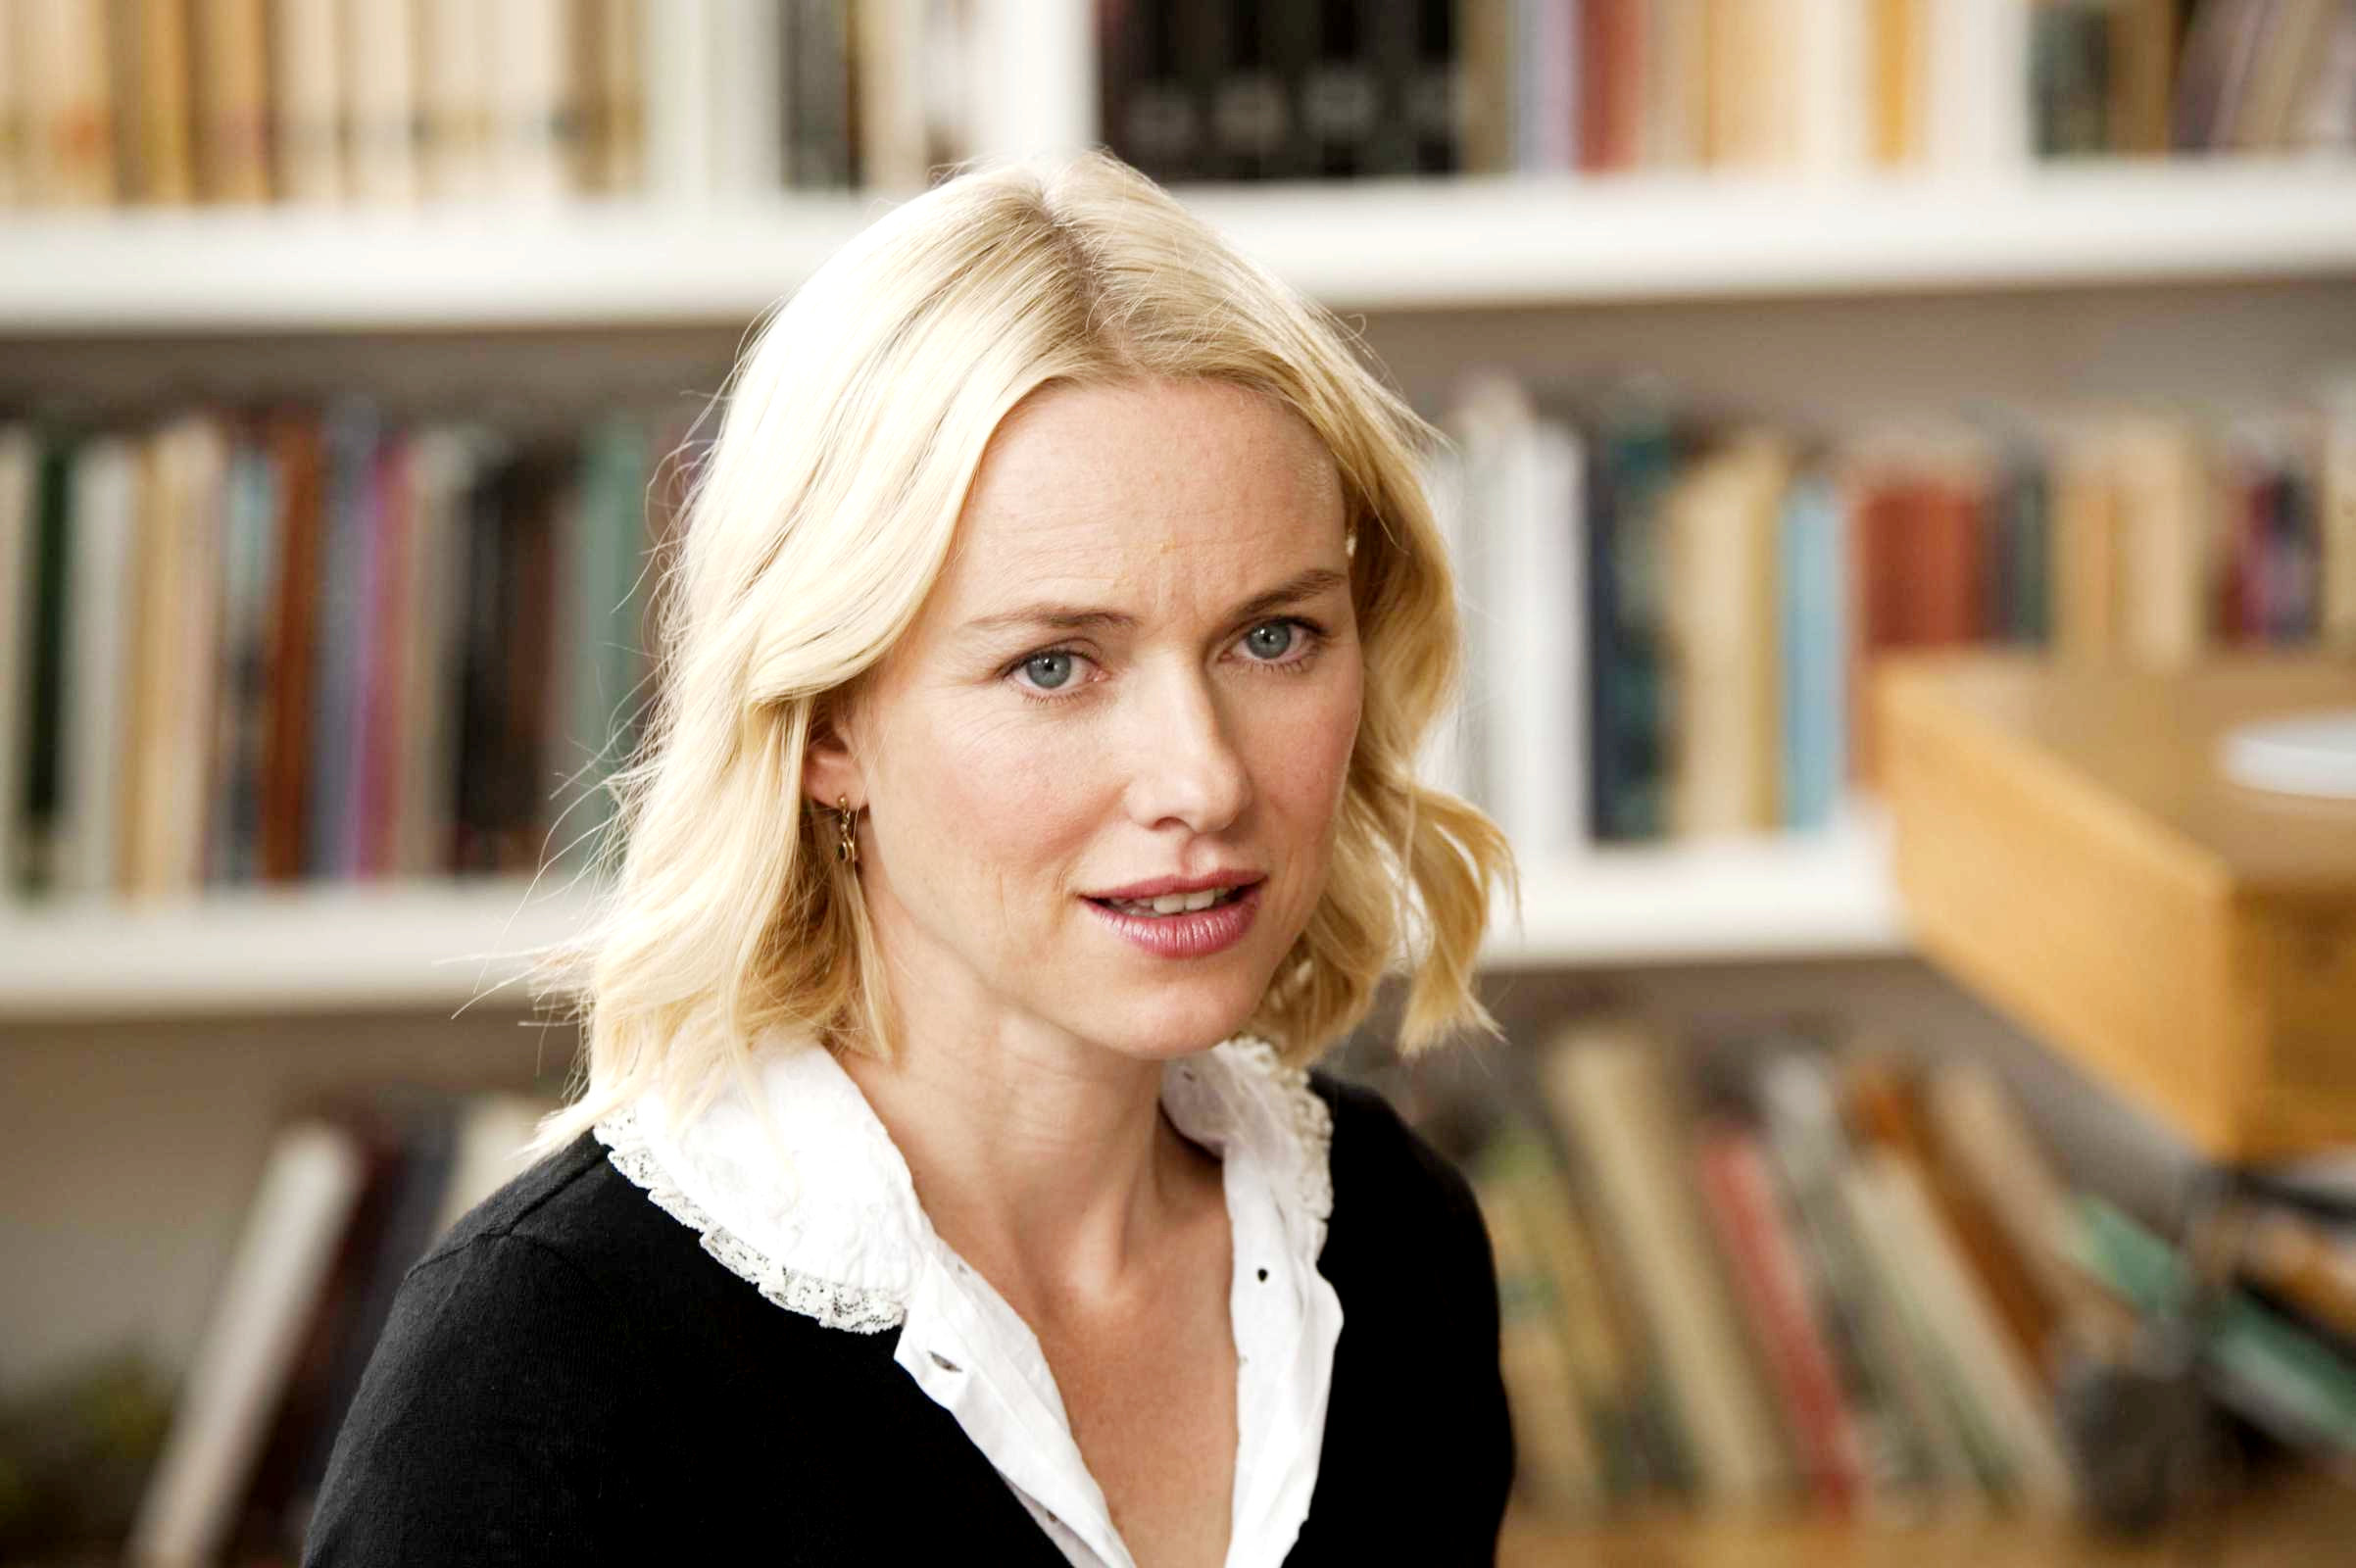 Naomi Watts stars as Sally in Sony Pictures Classics' You Will Meet a Tall Dark Stranger (2010). Photo by Keith Hamshere